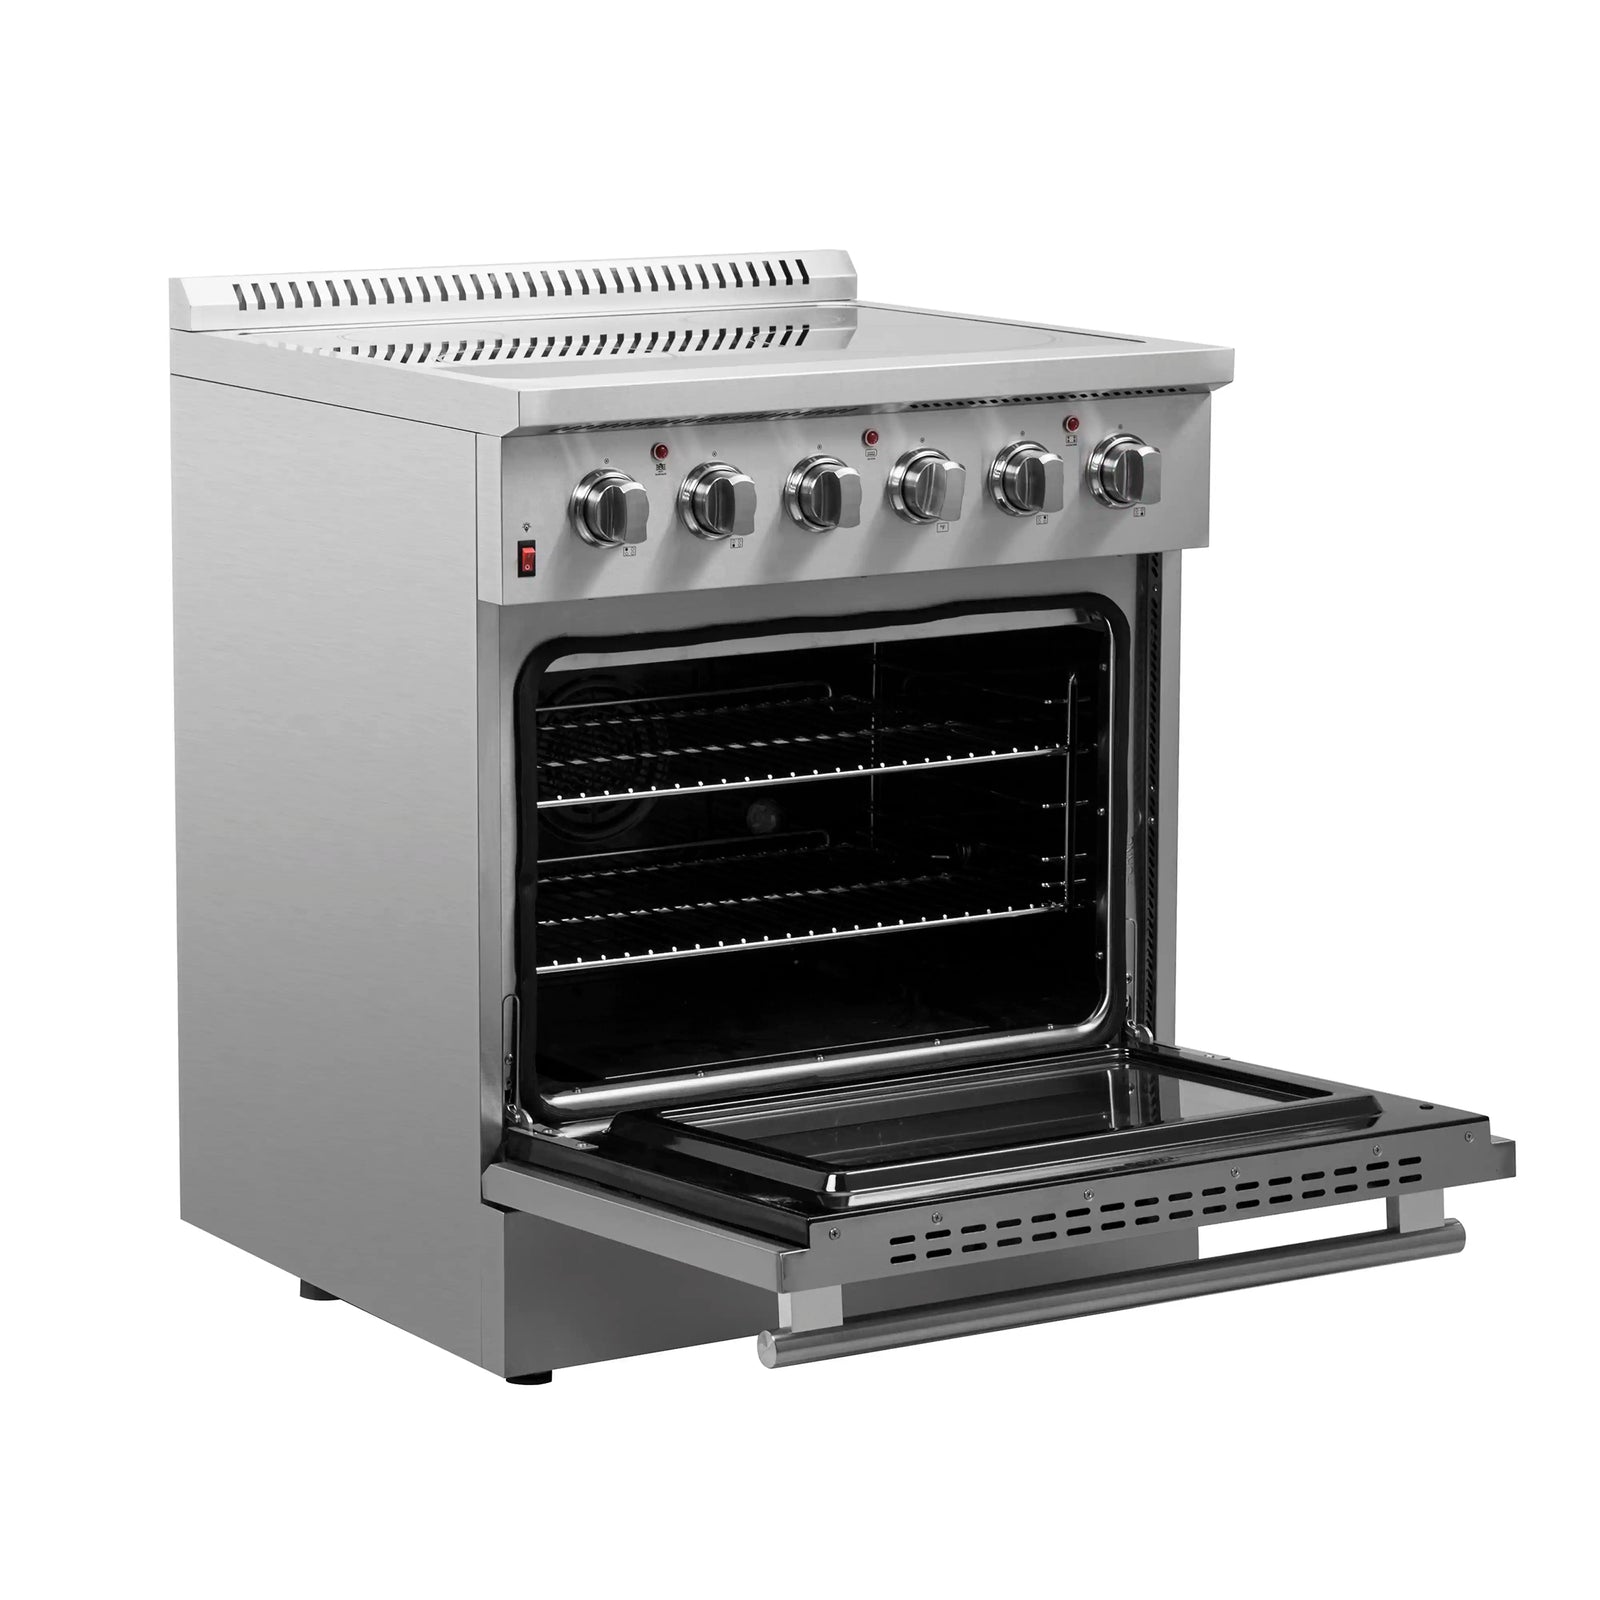 FORNO - Galiano 30-Inch Electric Range with Convection Oven in Stainless Steel